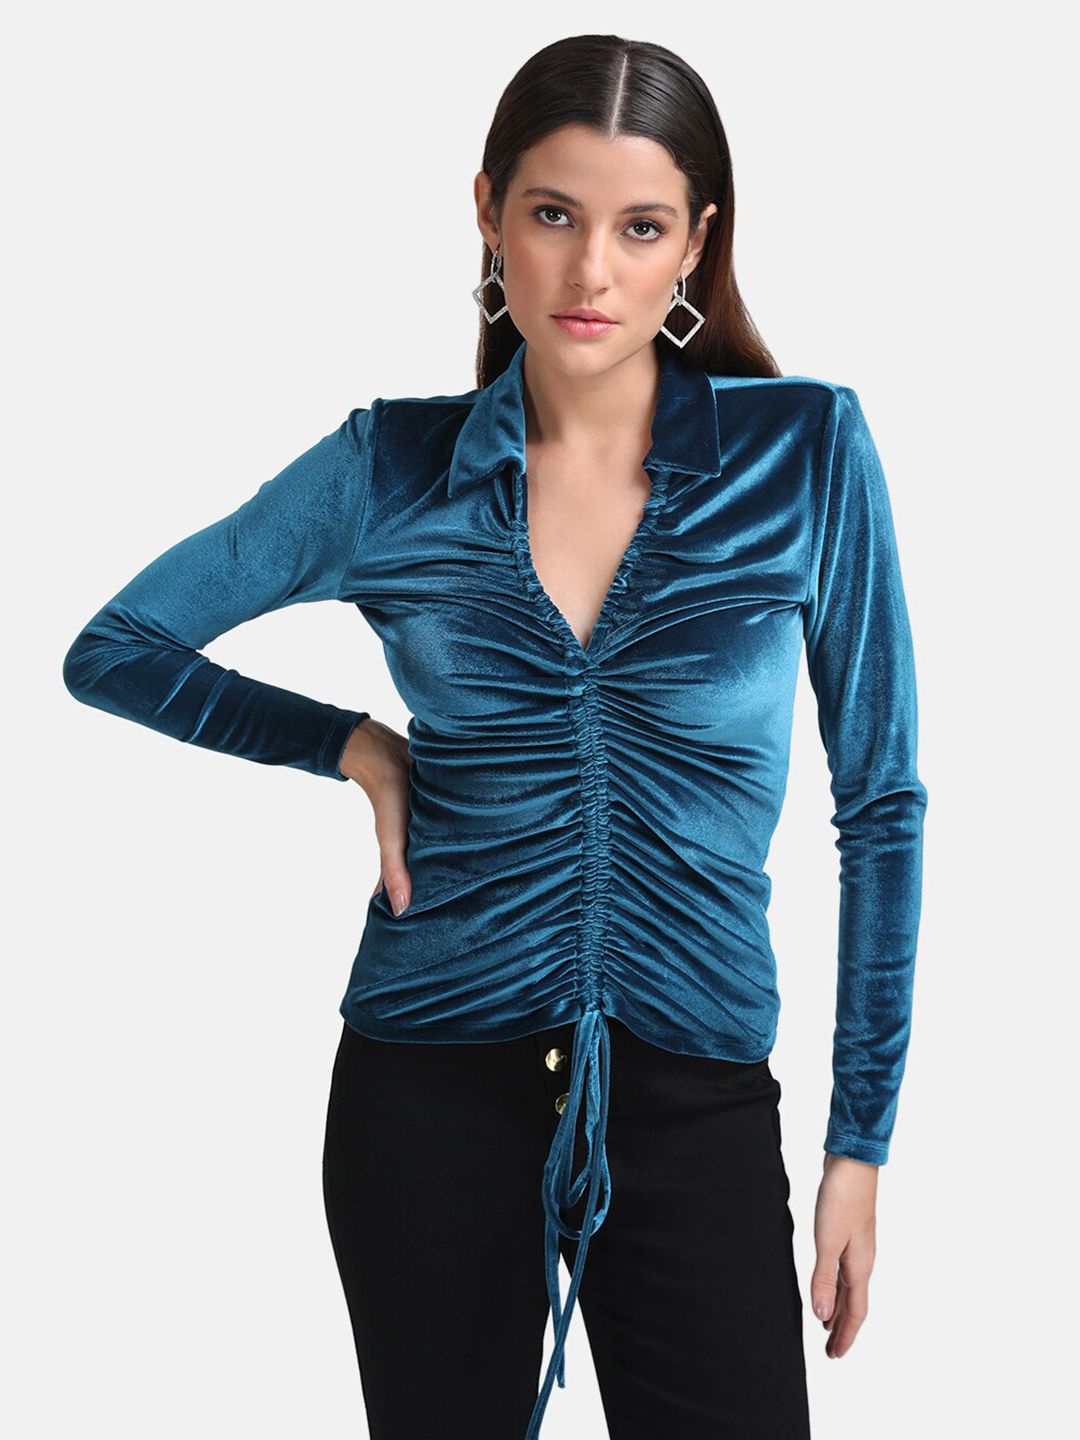 Kazo Teal Blue Ruched Velvet Top Price in India